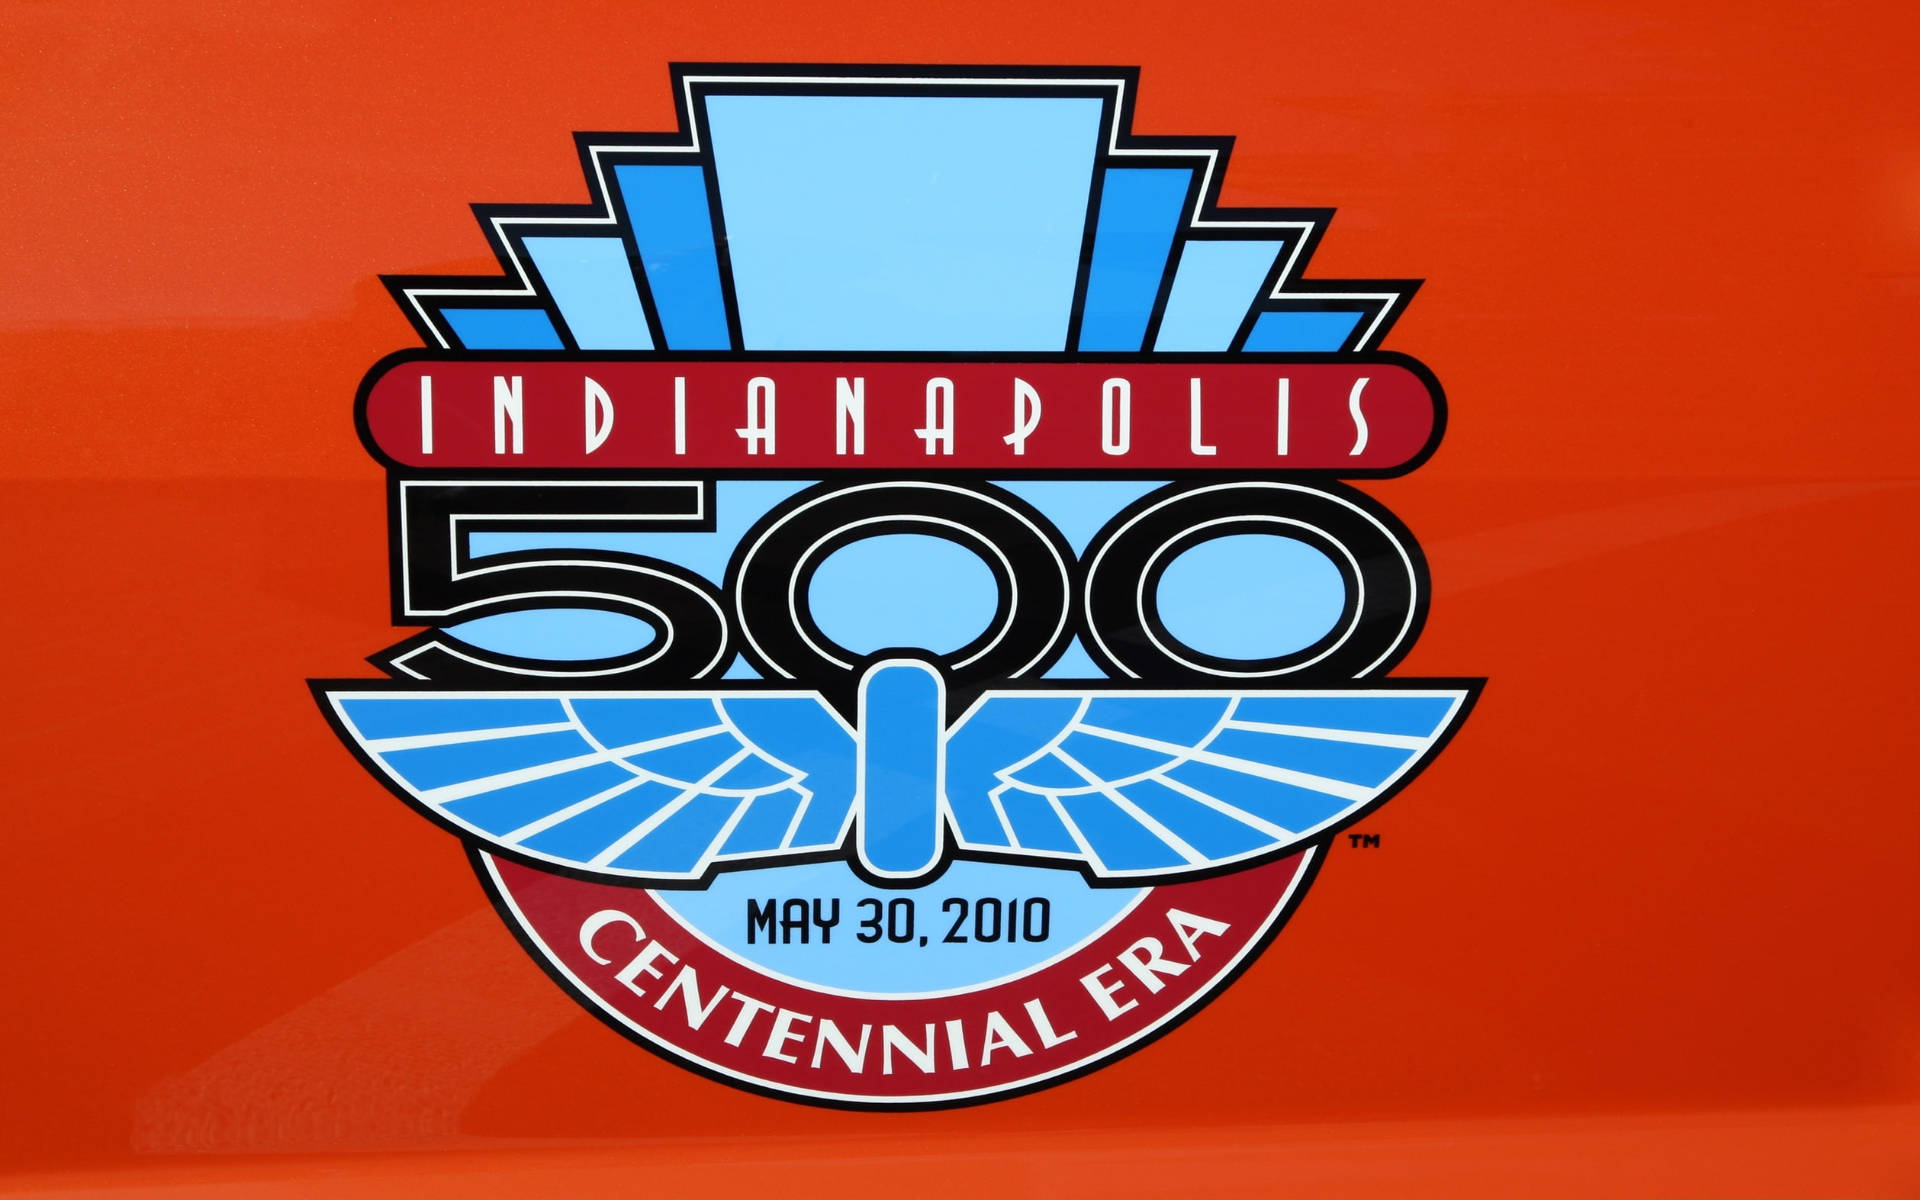 Indianapolis 500 Wallpaper Images